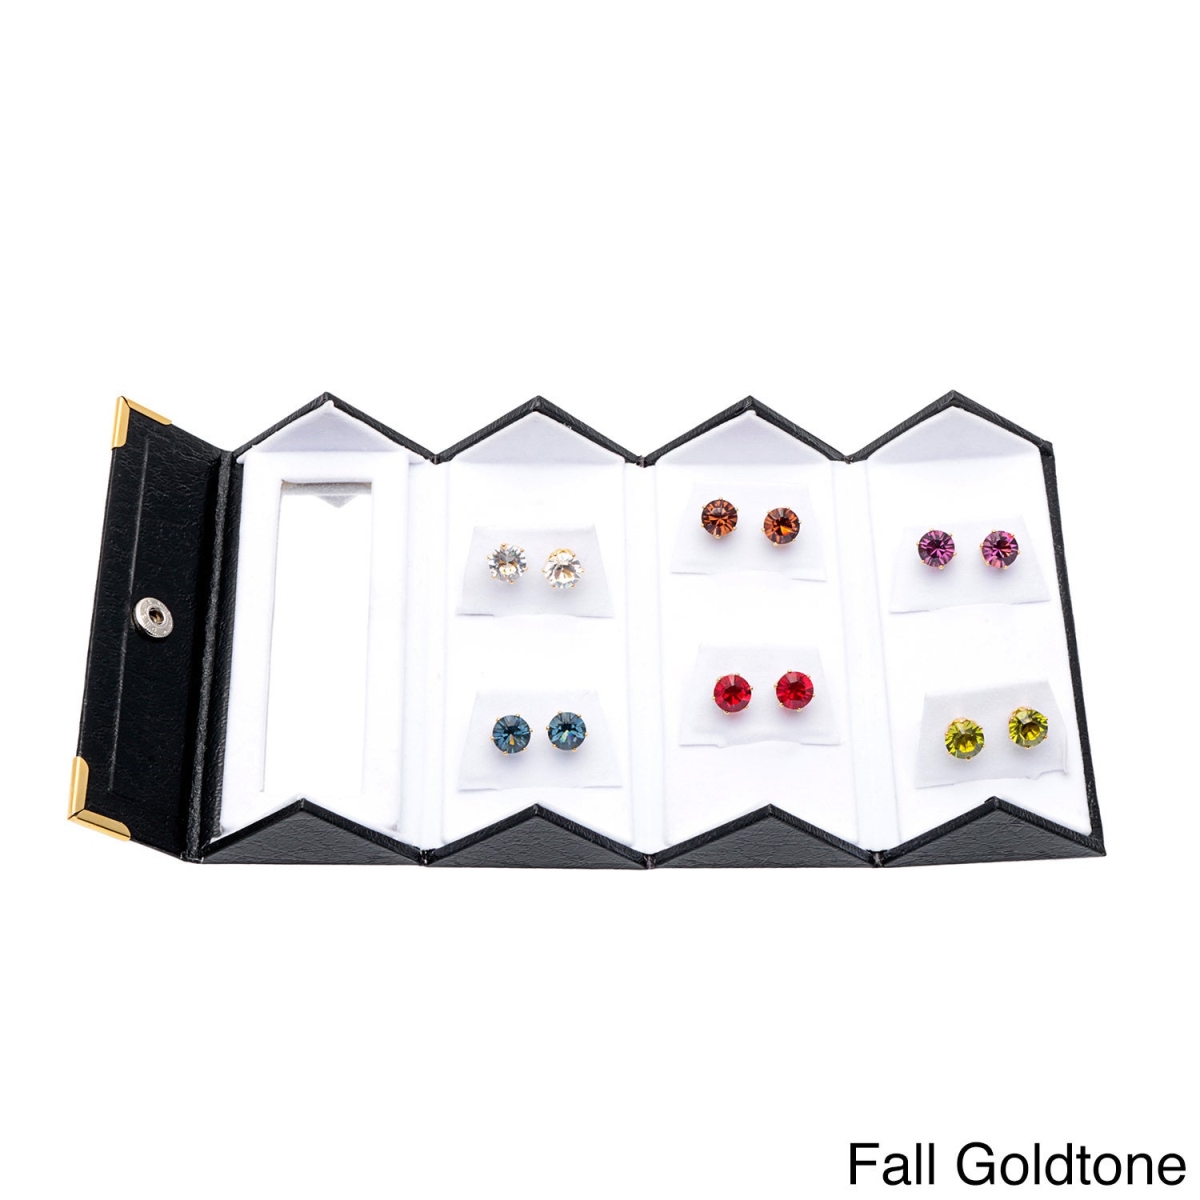 Picture of Alexa Starr  B7825/Fall-Goldtone 8mm Crystal Stud Earrings Made with Austrian Crystal Elements (Set of 6)